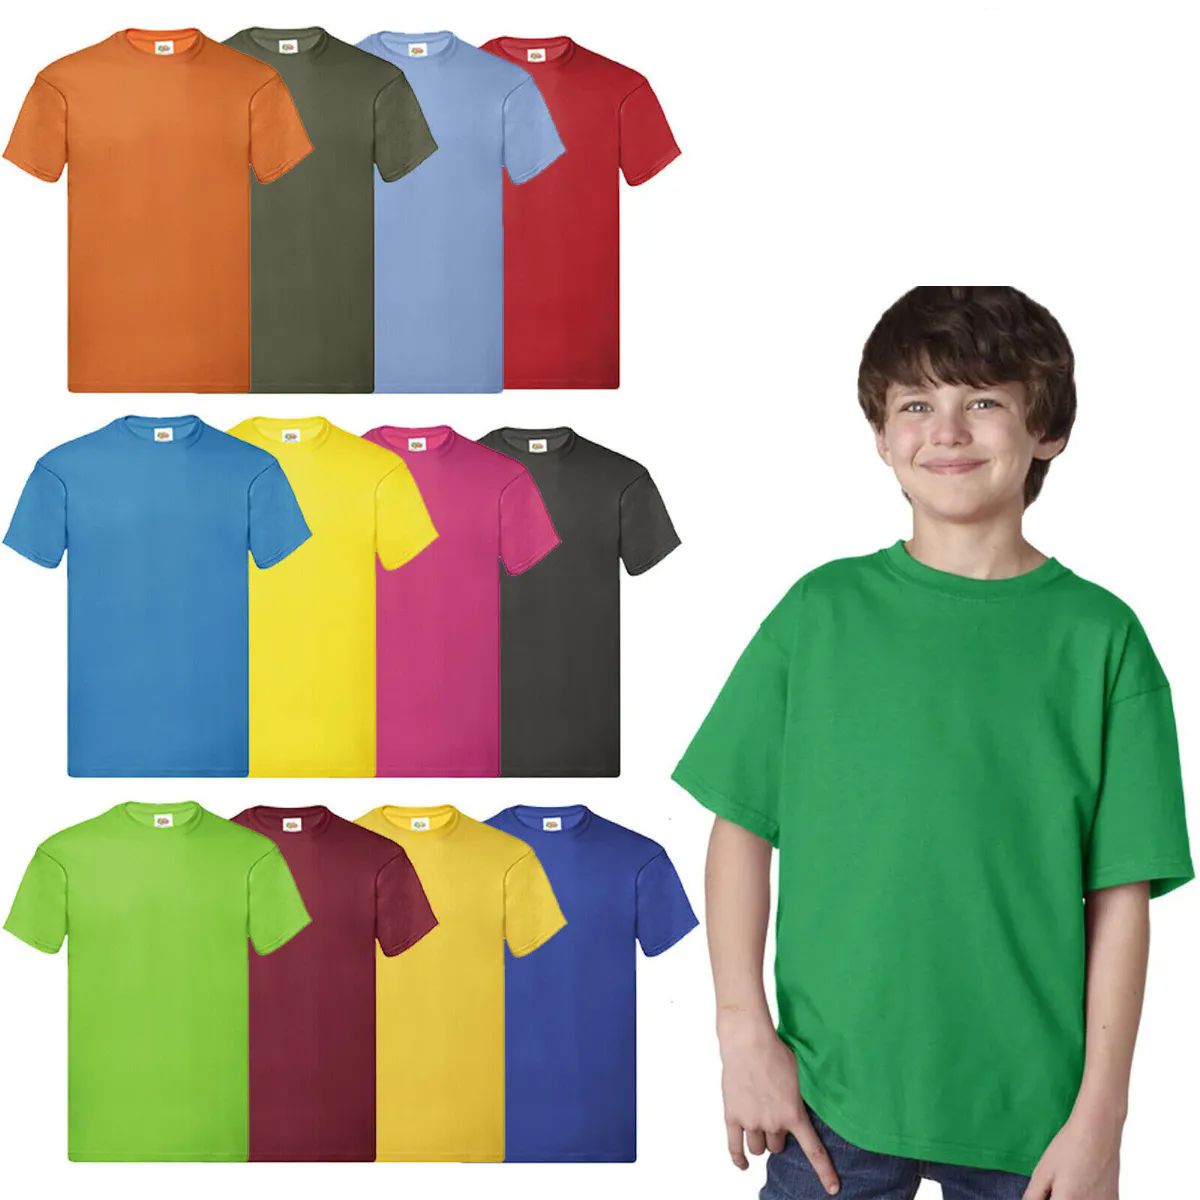 72 Pieces of Billion Hats Kids Youth Cotton Assorted Colors T Shirts Size xl